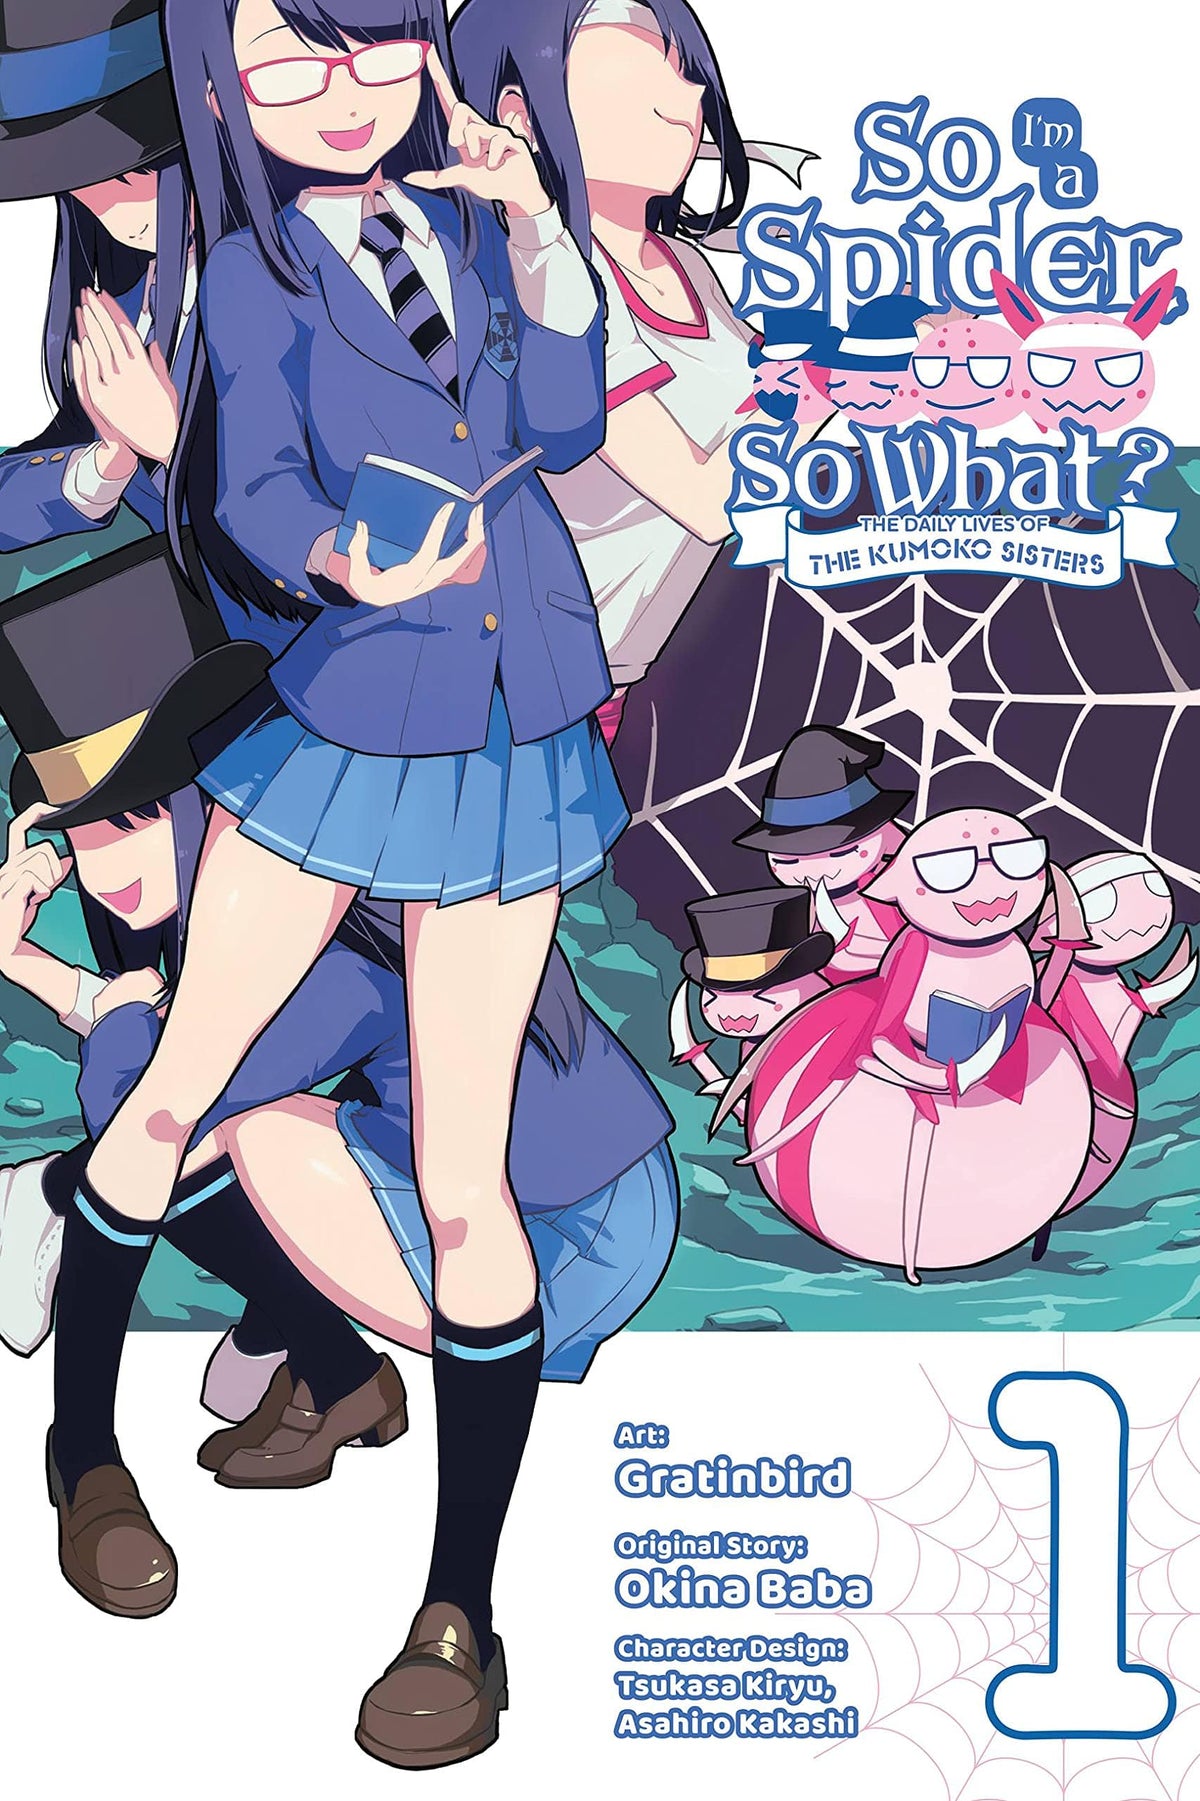 So I'm a Spider So What?: Daily Lives of the Kumoko Sisters Vol. 1 - Third Eye